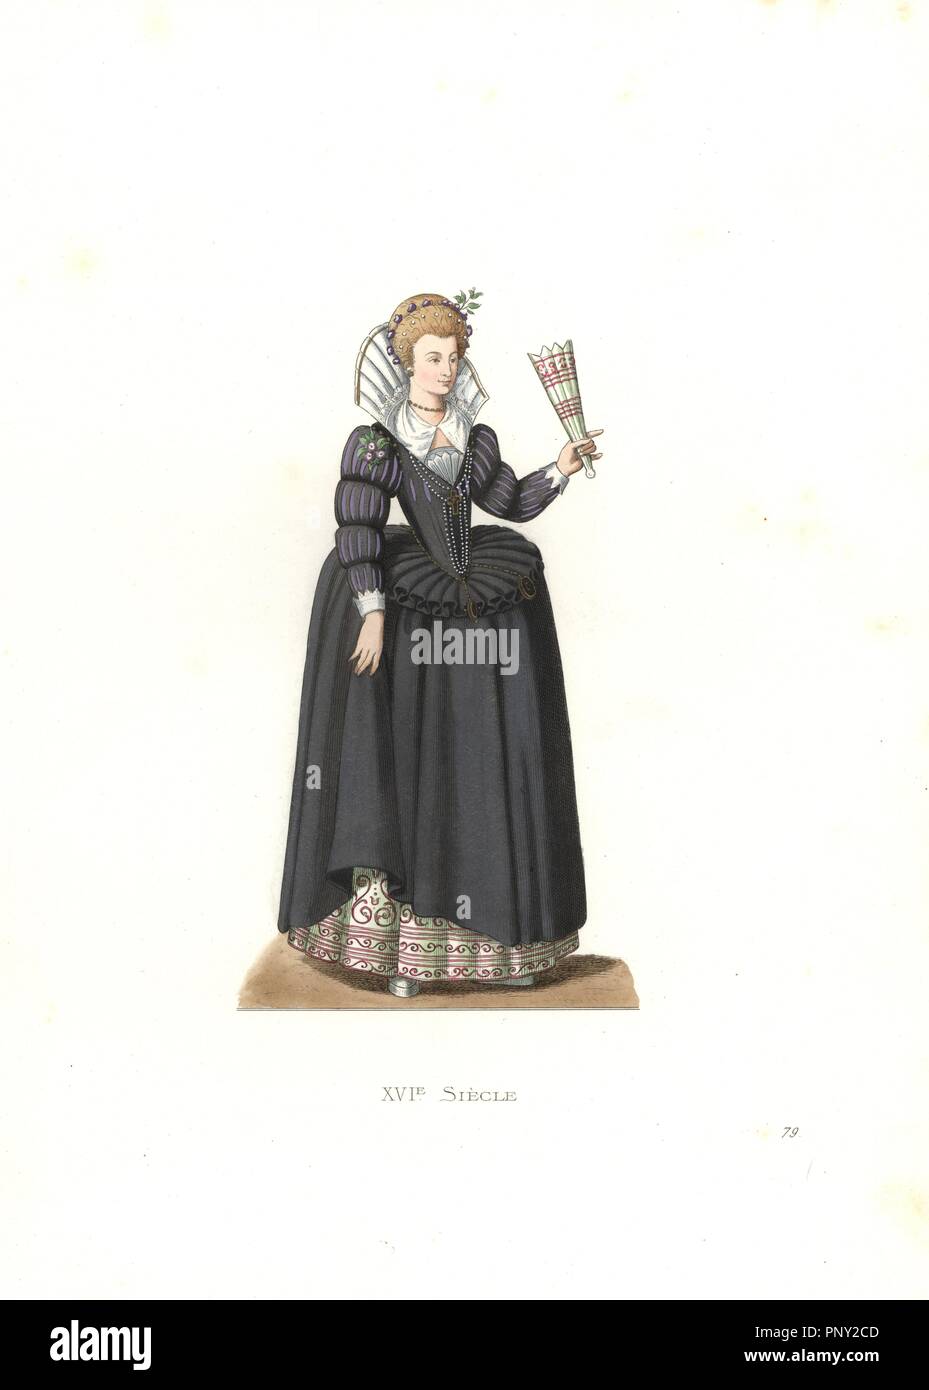 French woman from the reign of King Henry III, 16th century, from the collection of de Gaignieres. Handcolored illustration by E. Lechevallier-Chevignard, lithographed by A. Didier, L. Flameng, F. Laguillermie, from Georges Duplessis's 'Costumes historiques des XVIe, XVIIe et XVIIIe siecles' (Historical costumes of the 16th, 17th and 18th centuries), Paris 1867. The book was a continuation of the series on the costumes of the 12th to 15th centuries published by Camille Bonnard and Paul Mercuri from 1830. Georges Duplessis (1834-1899) was curator of the Prints department at the Bibliotheque nat Stock Photo